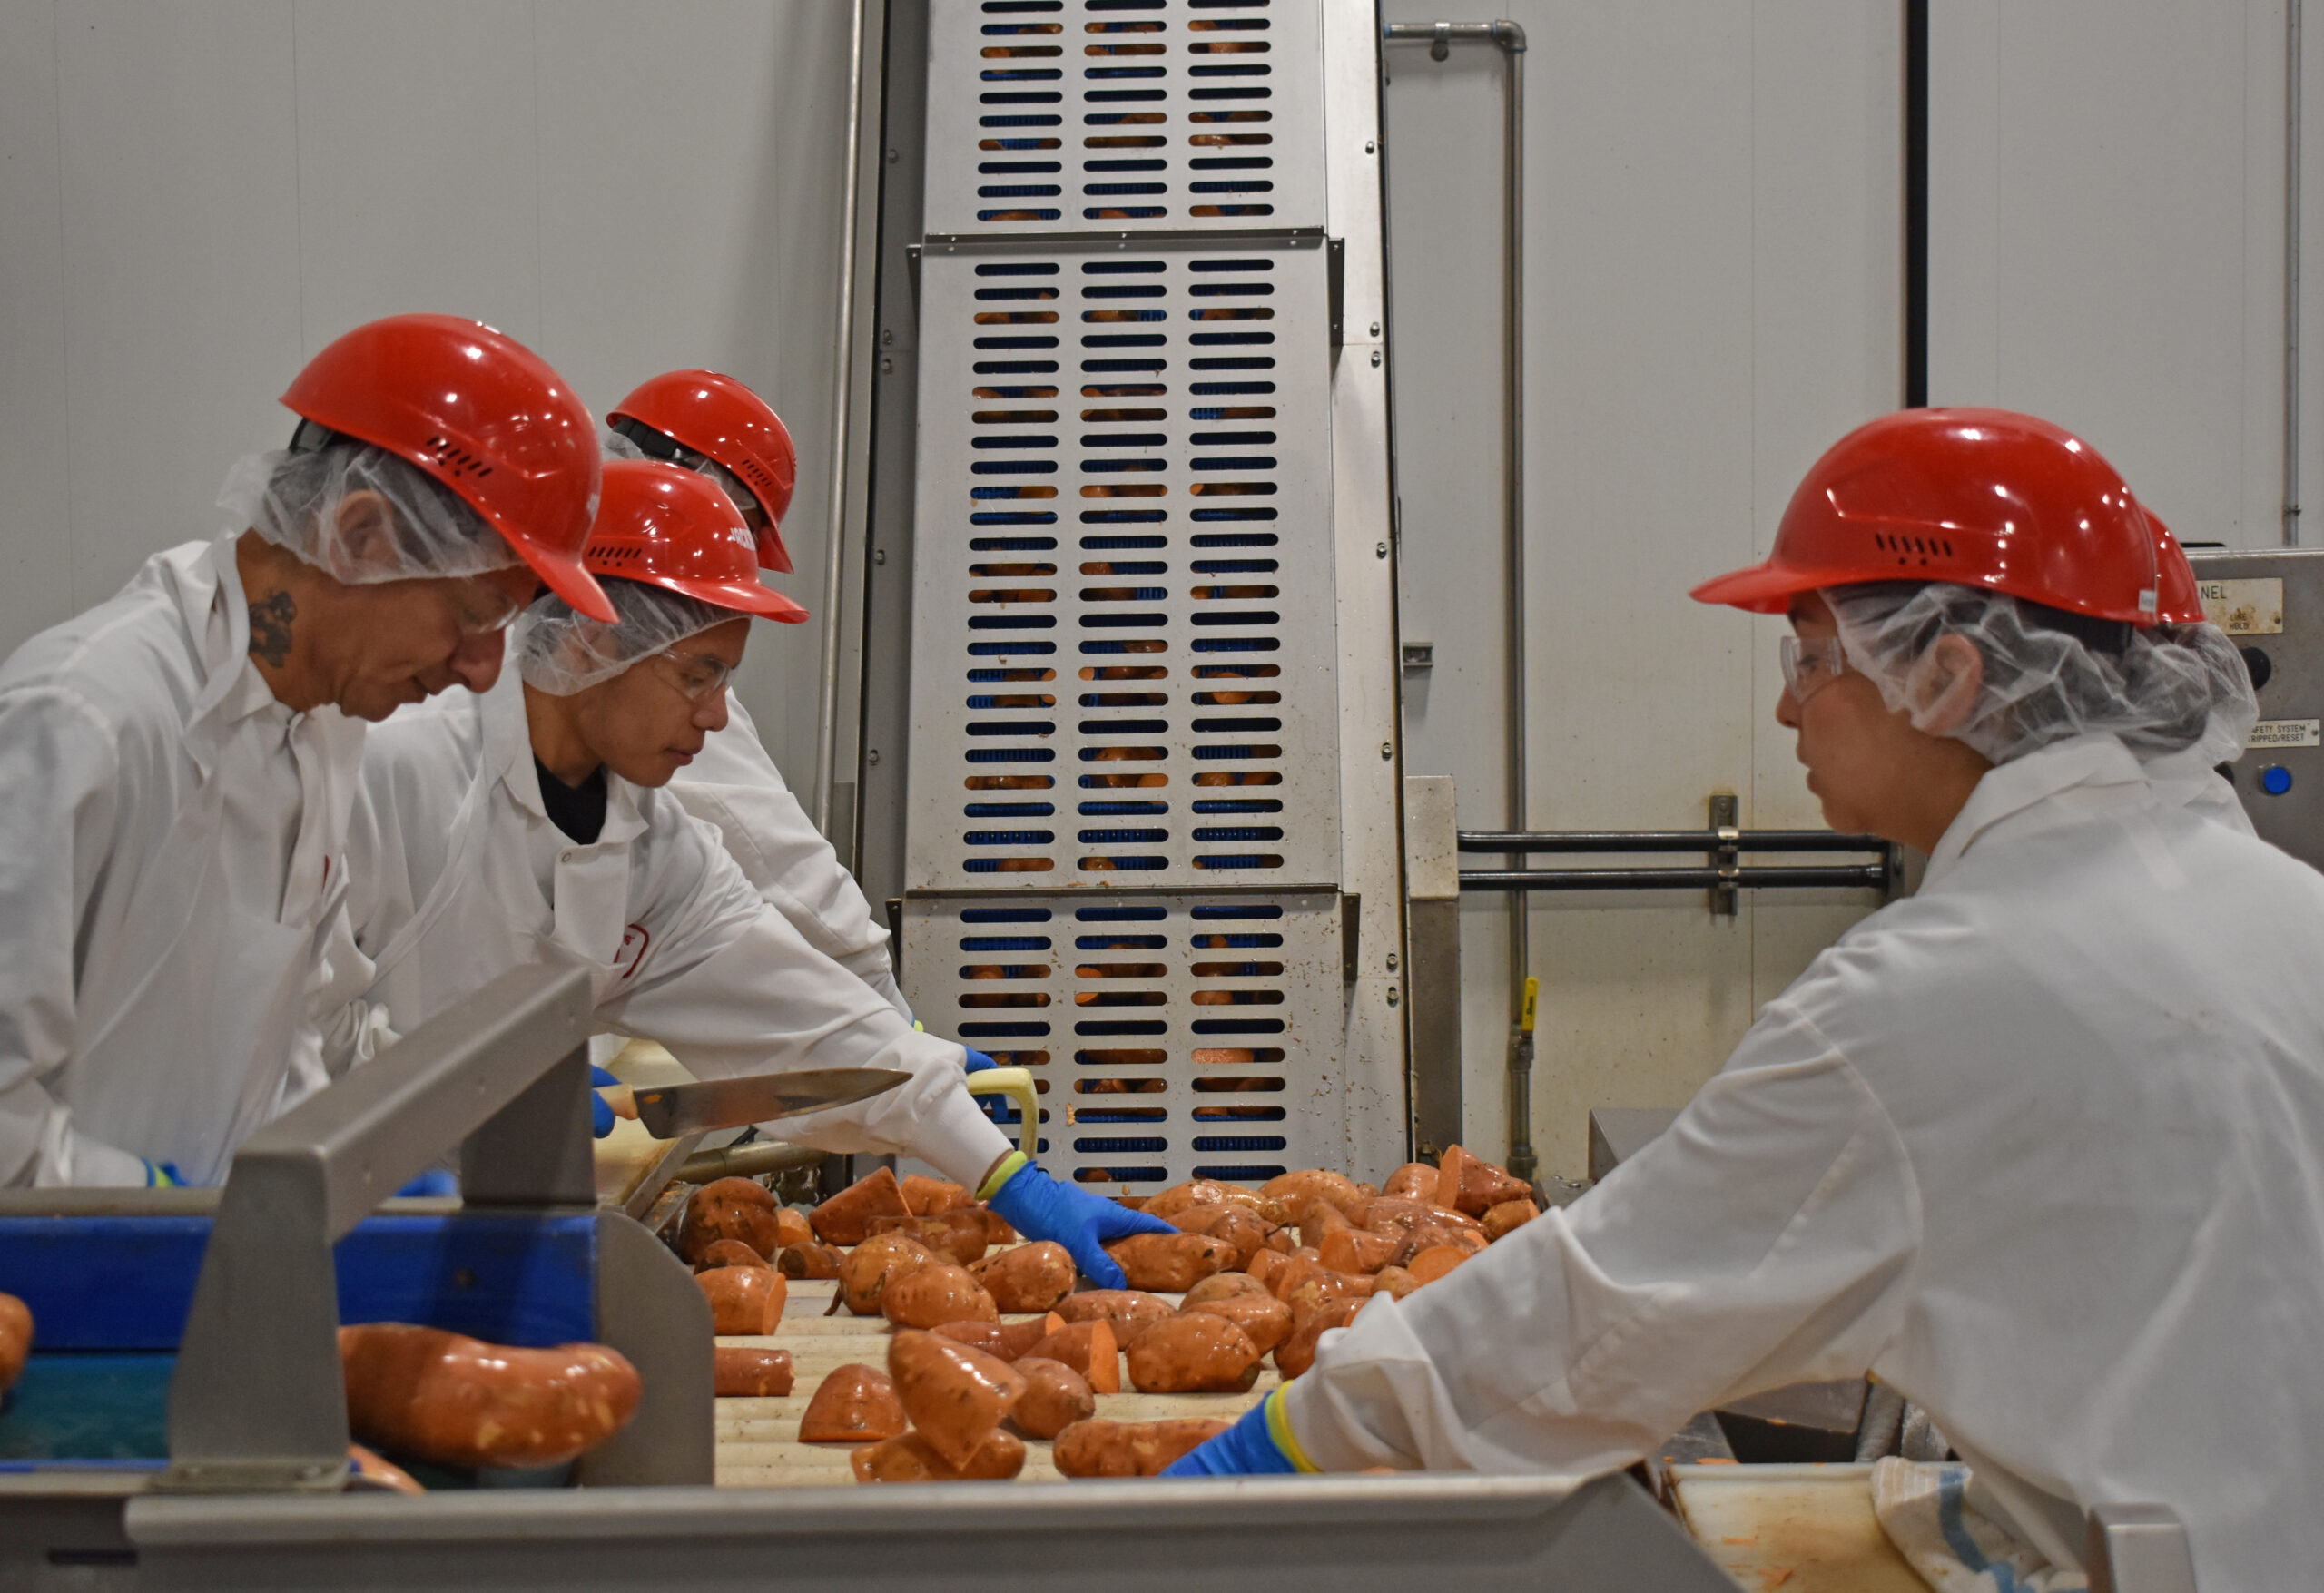 Sweet home, sweet potato: Jackson’s chips boosts production, workforce in Wisconsin